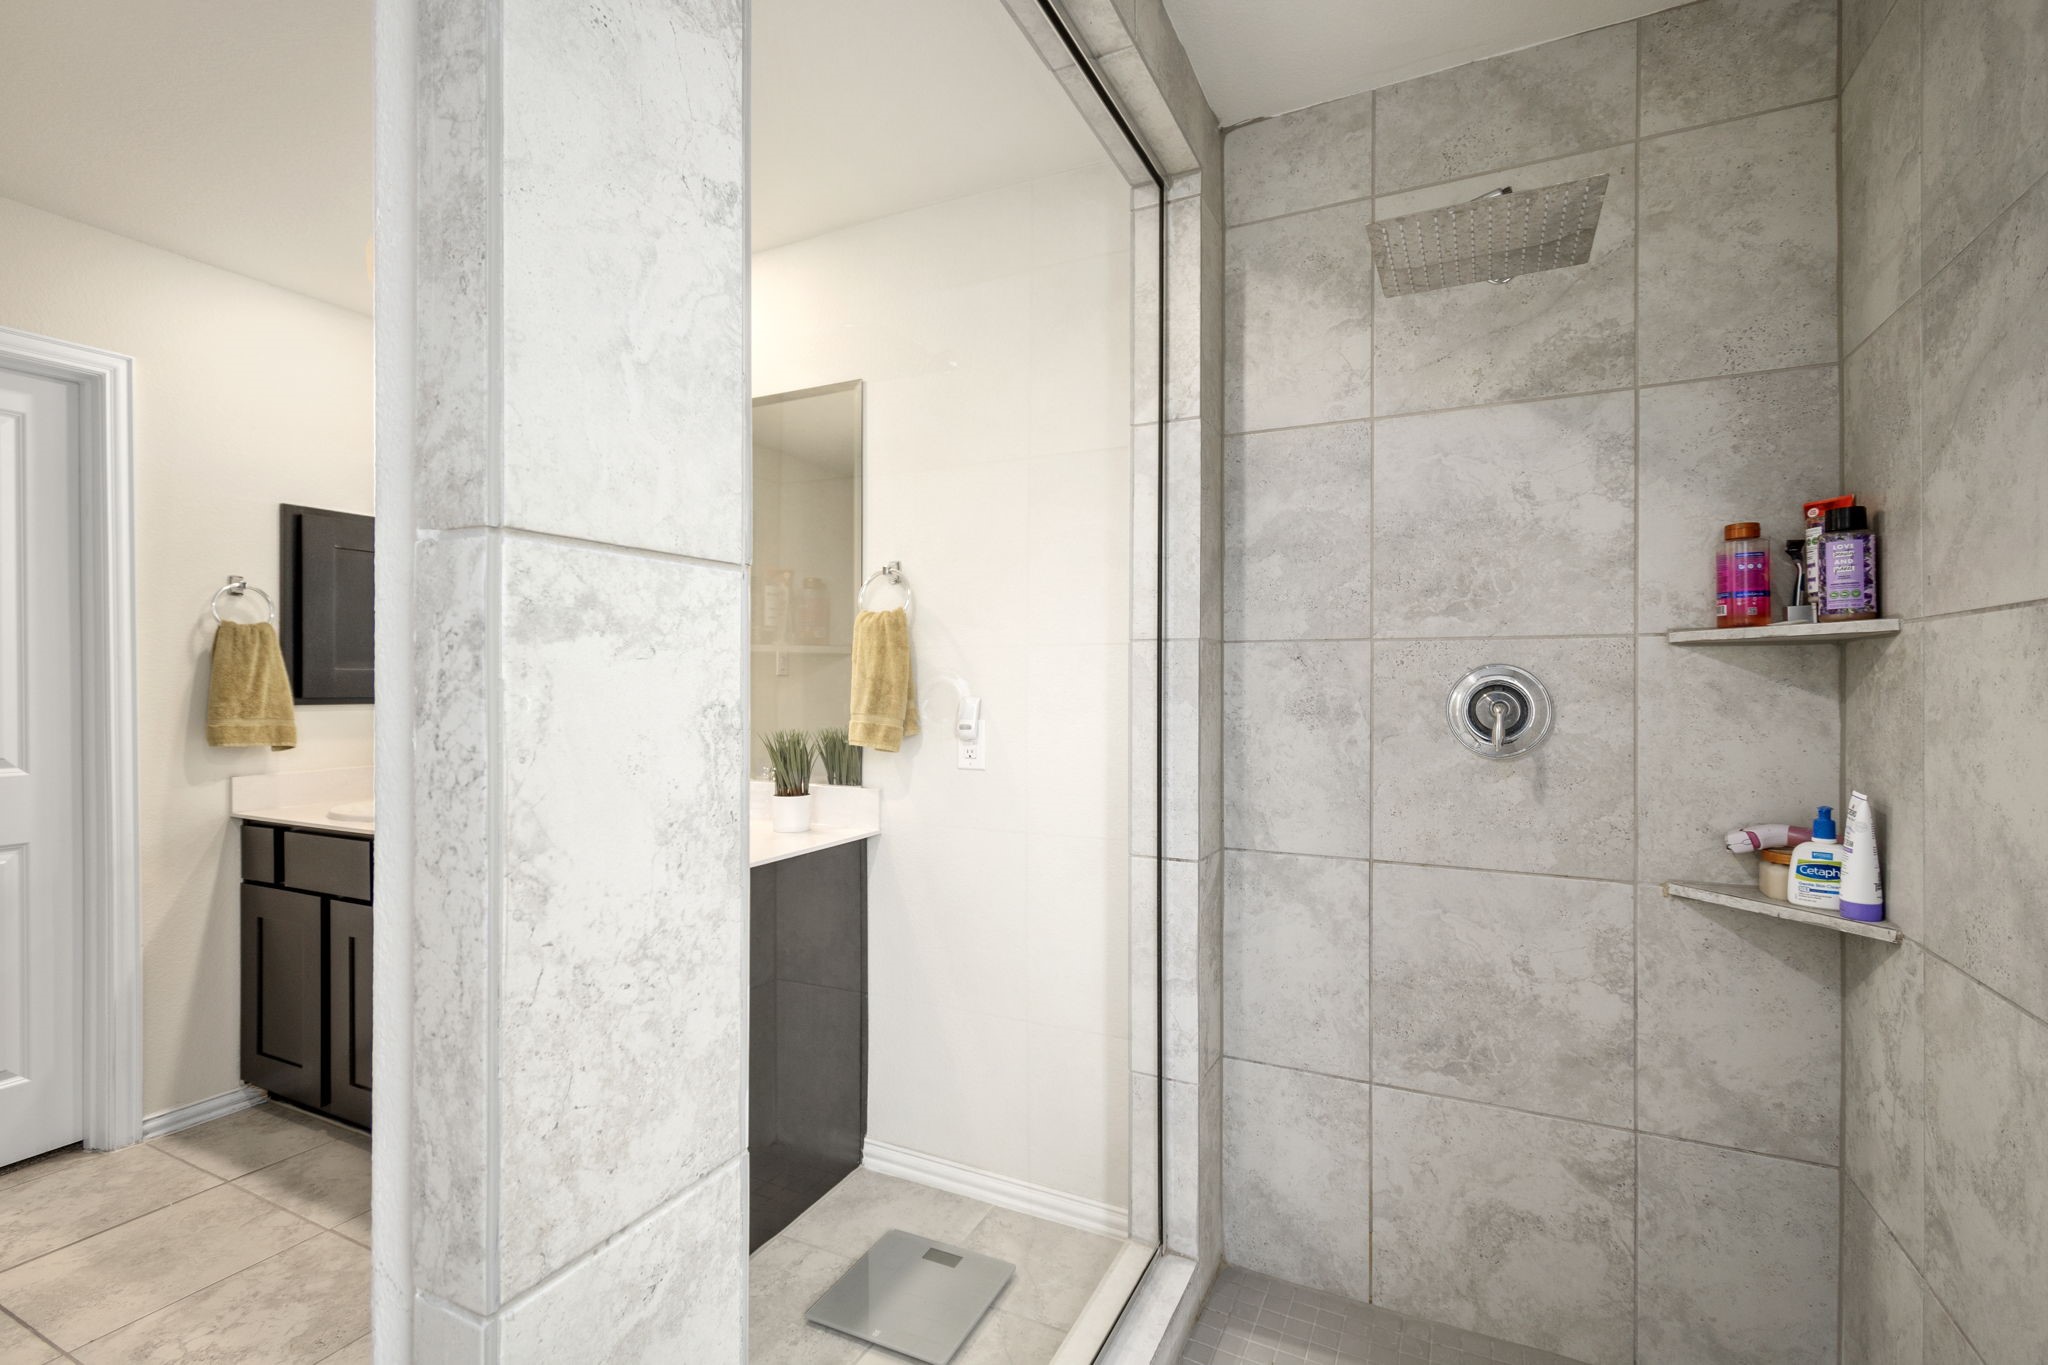 Large walk-in shower with rain shower head